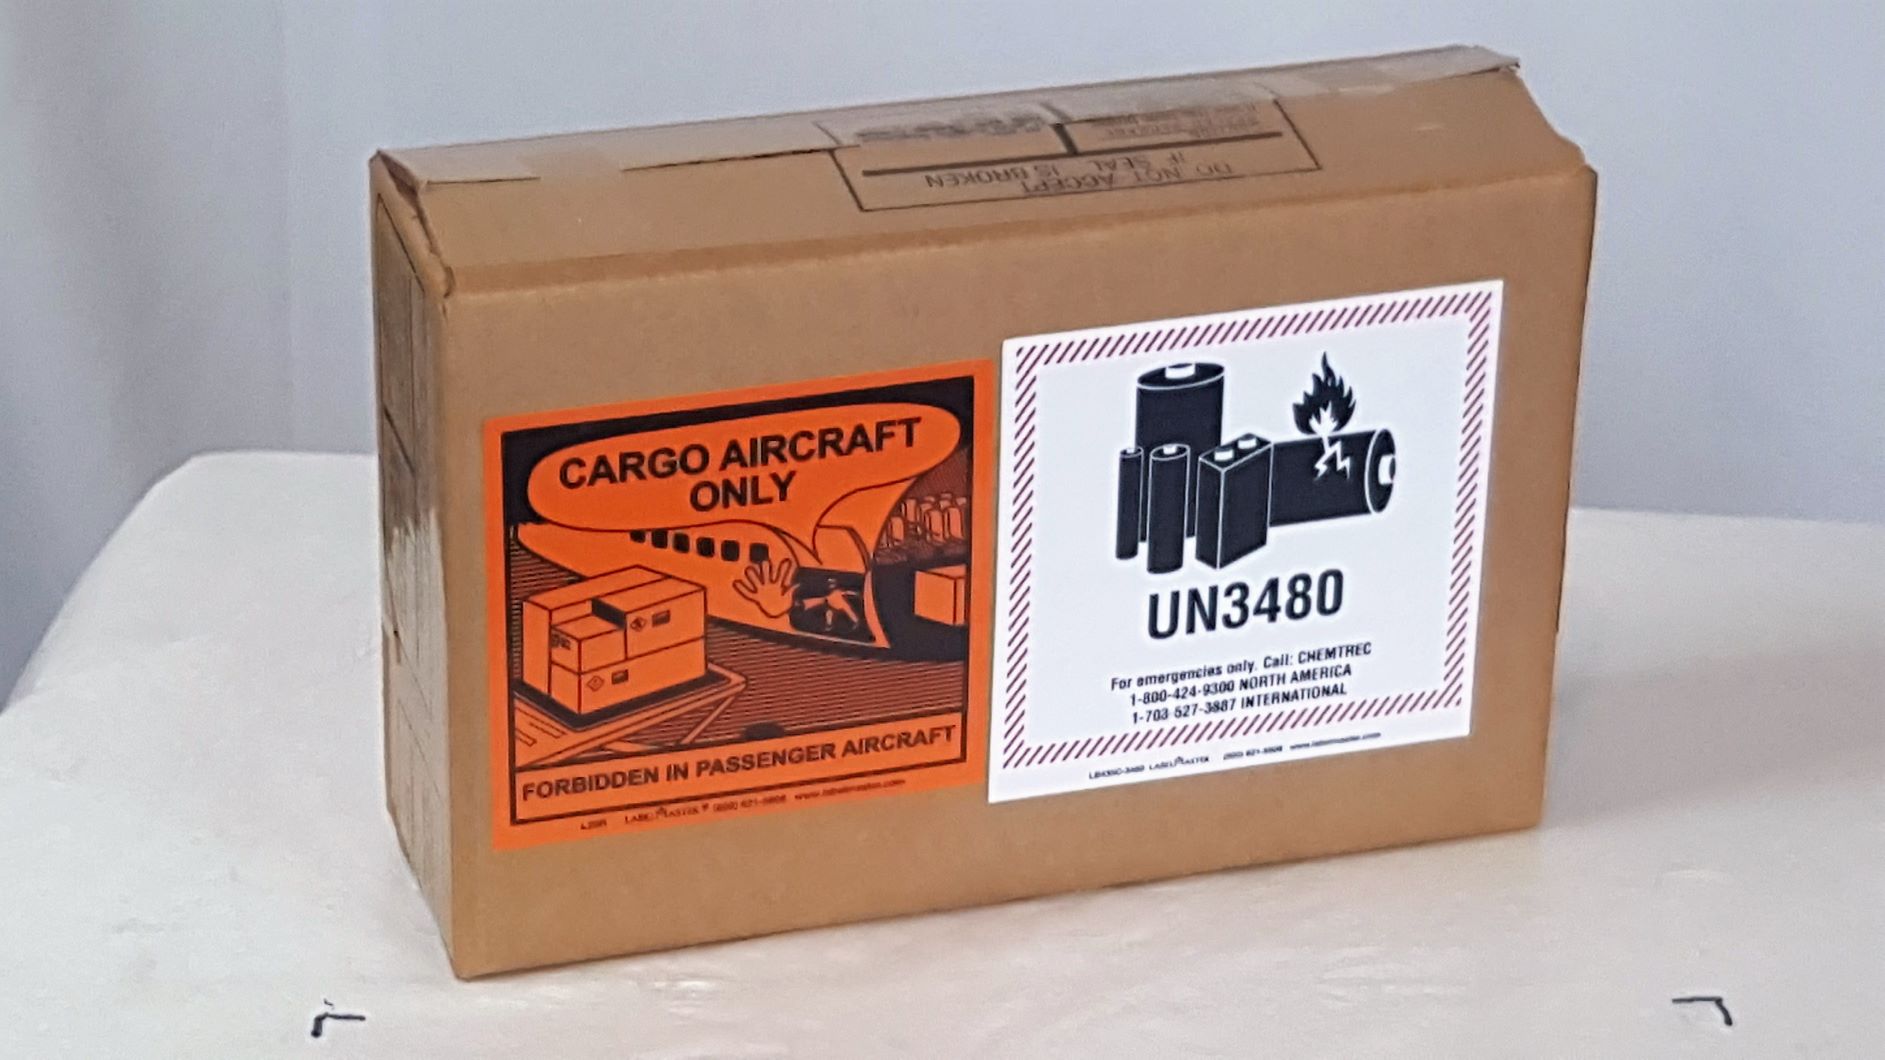 q-a-is-the-cargo-aircraft-only-label-required-for-un3480-daniels